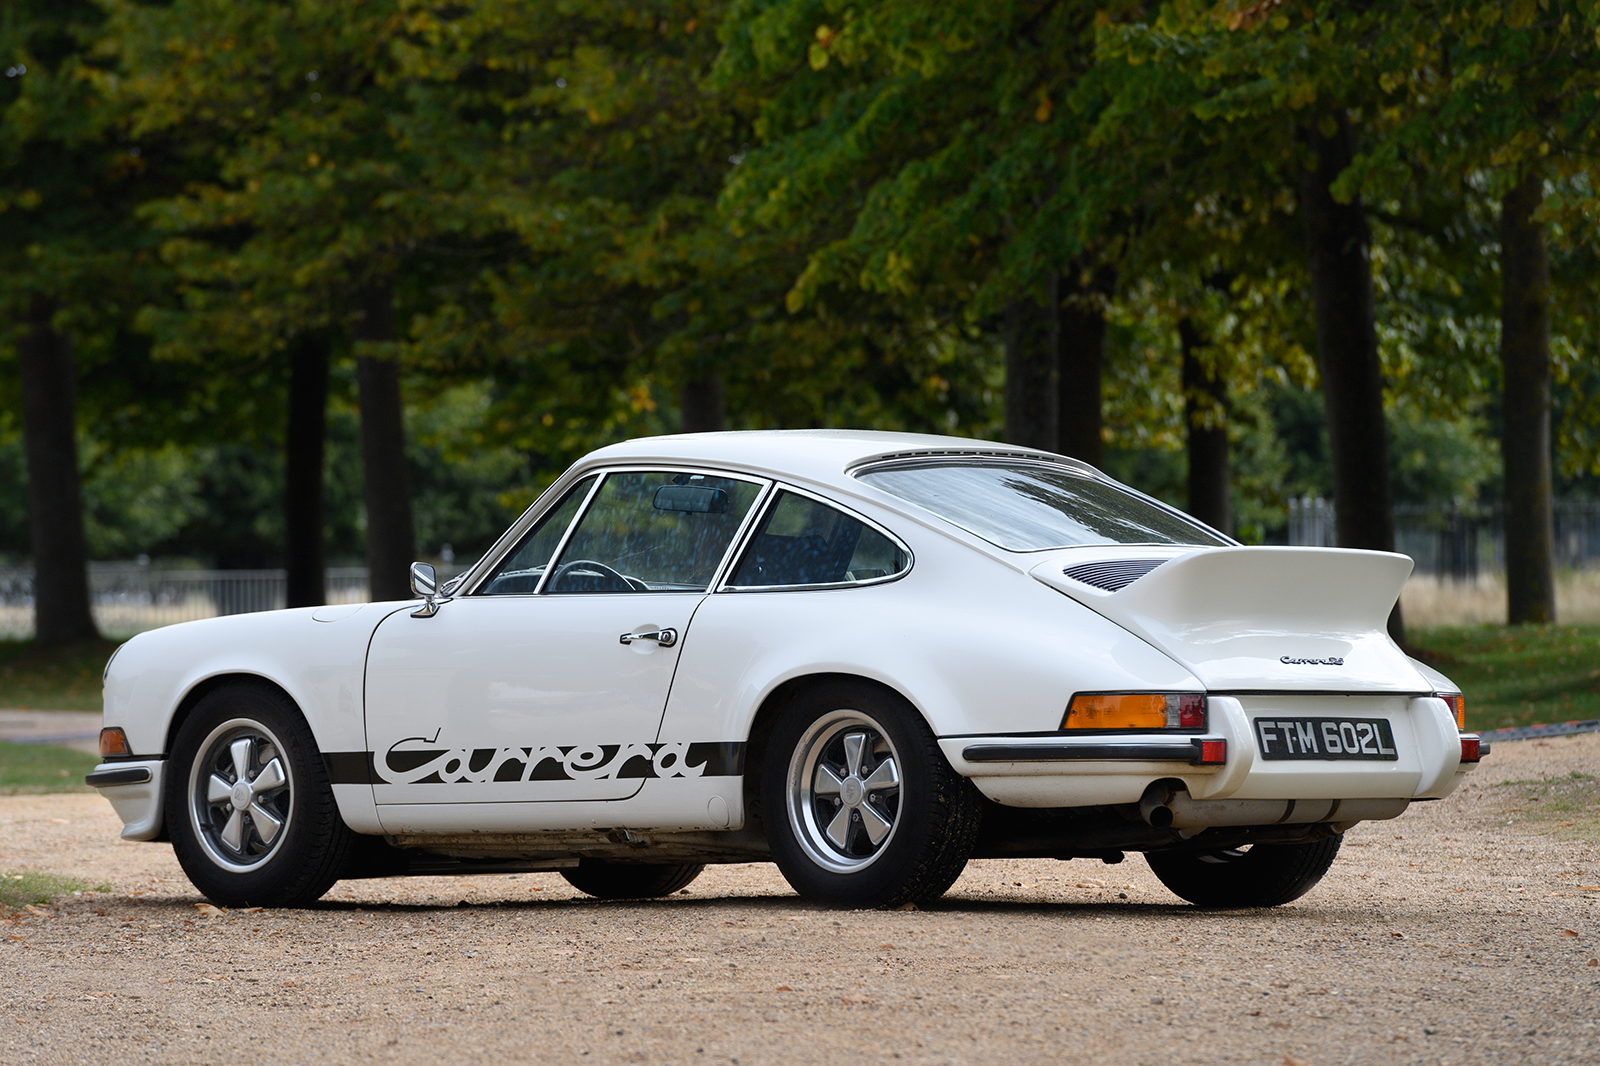 Classic & Sports Car – Homologation specials join London Concours line-up